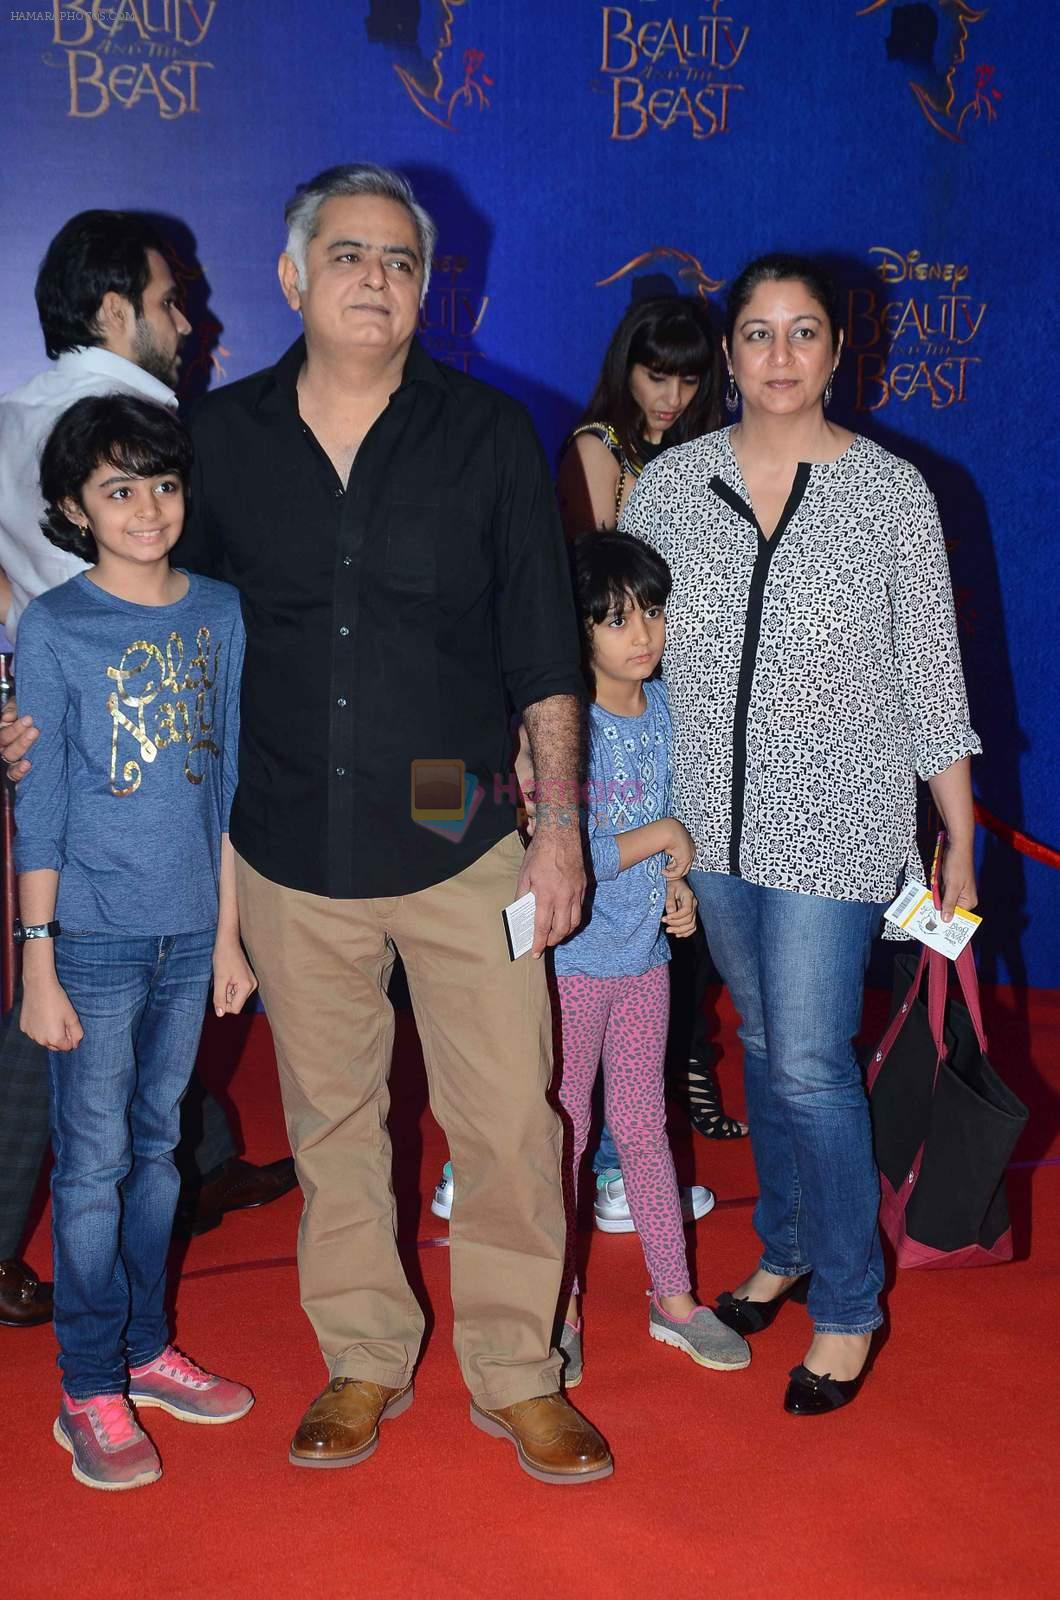 at Beauty and the Beast red carpet in Mumbai on 21st Oct 2015